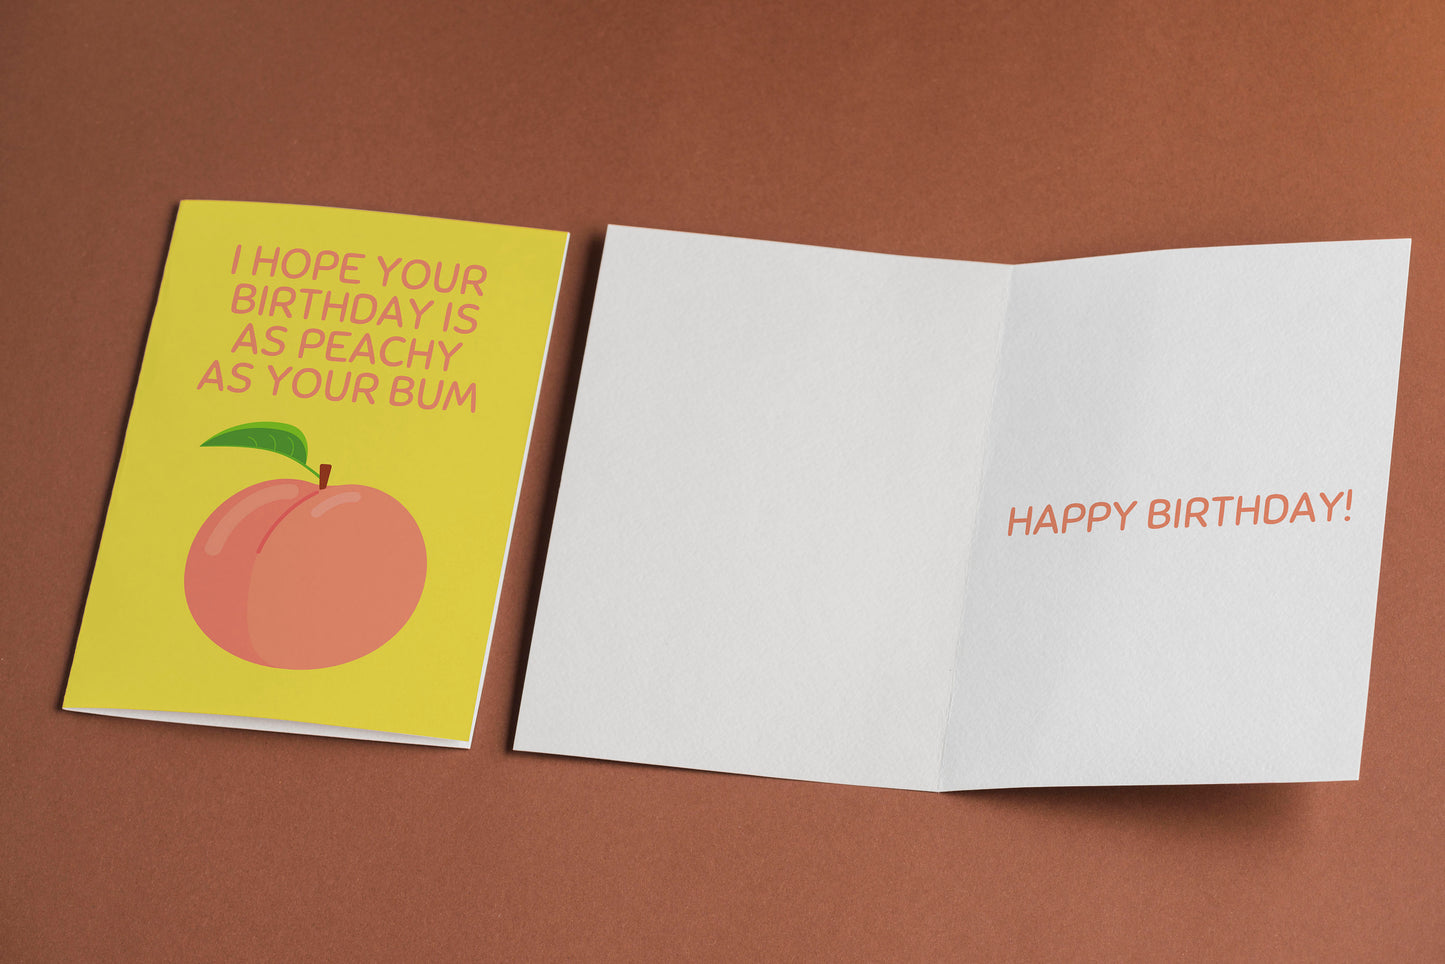 Funny Birthday Card For Her, Peachy Bum Birthday, Peachy As Your Bum, Happy Birthday, Birthday Card, Card for Gym Goer,